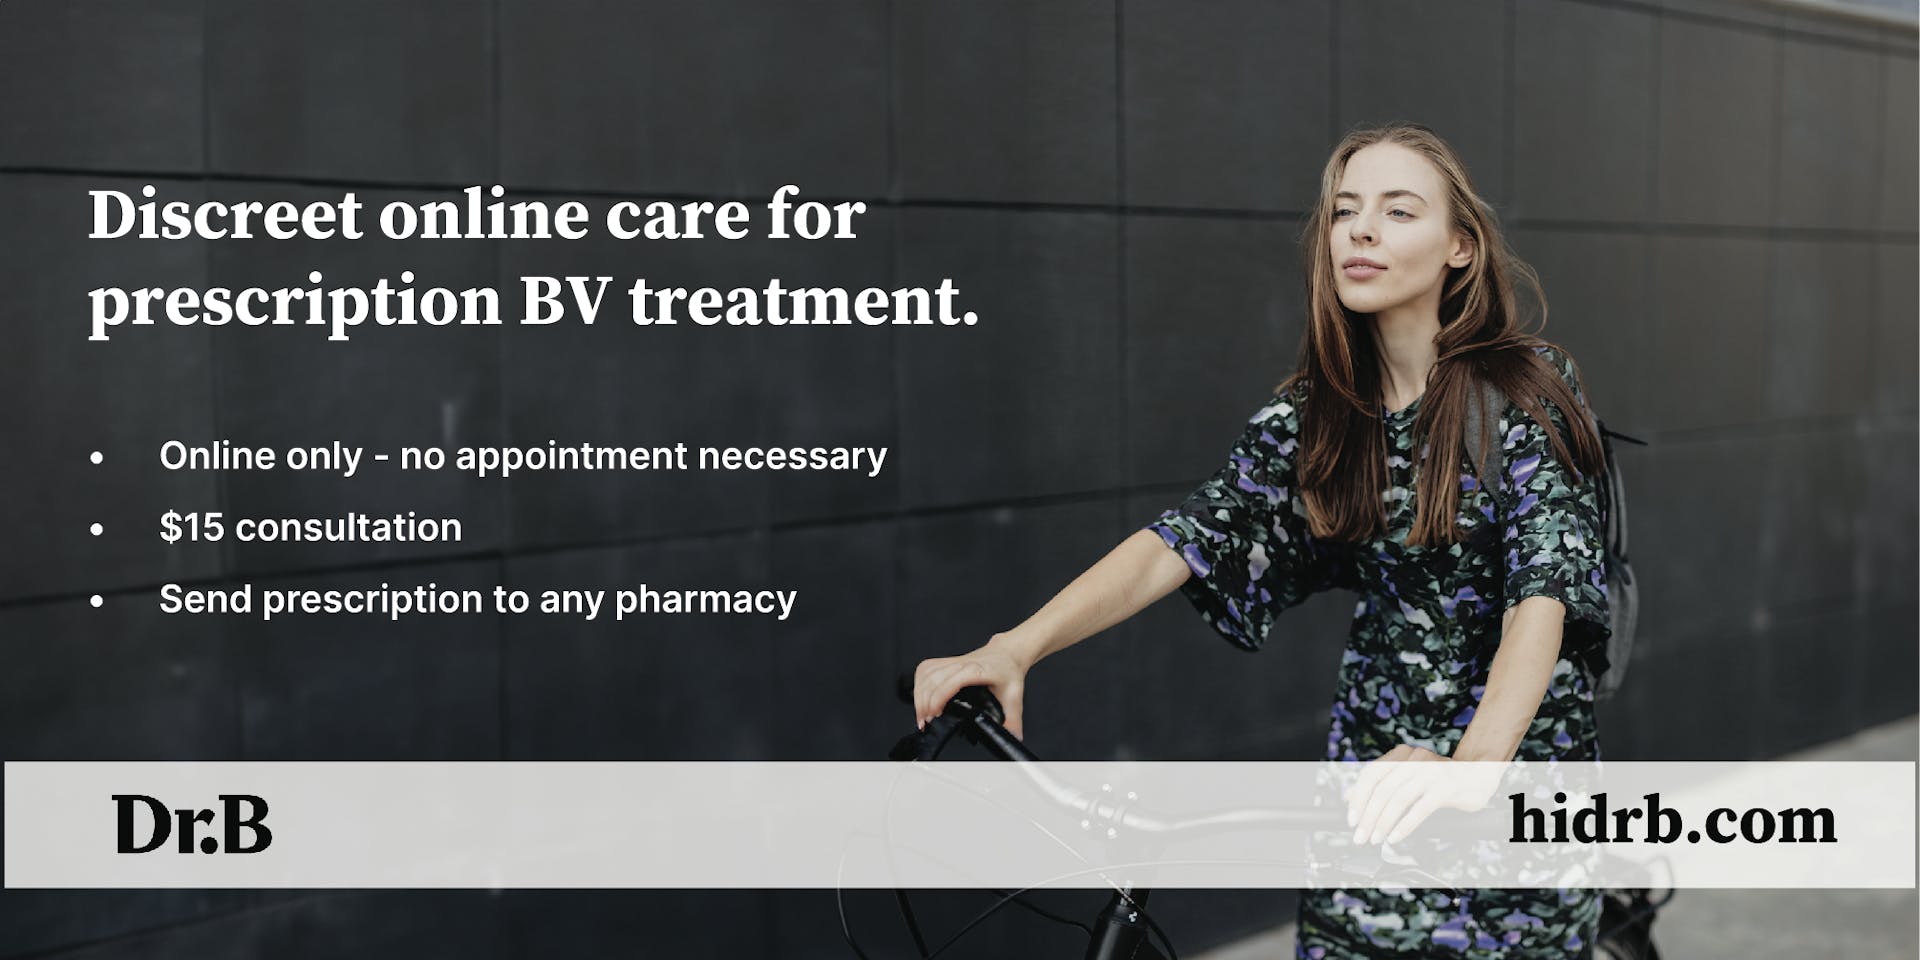 Banner advertising Dr. B's services for bacterial vaginosis treatments